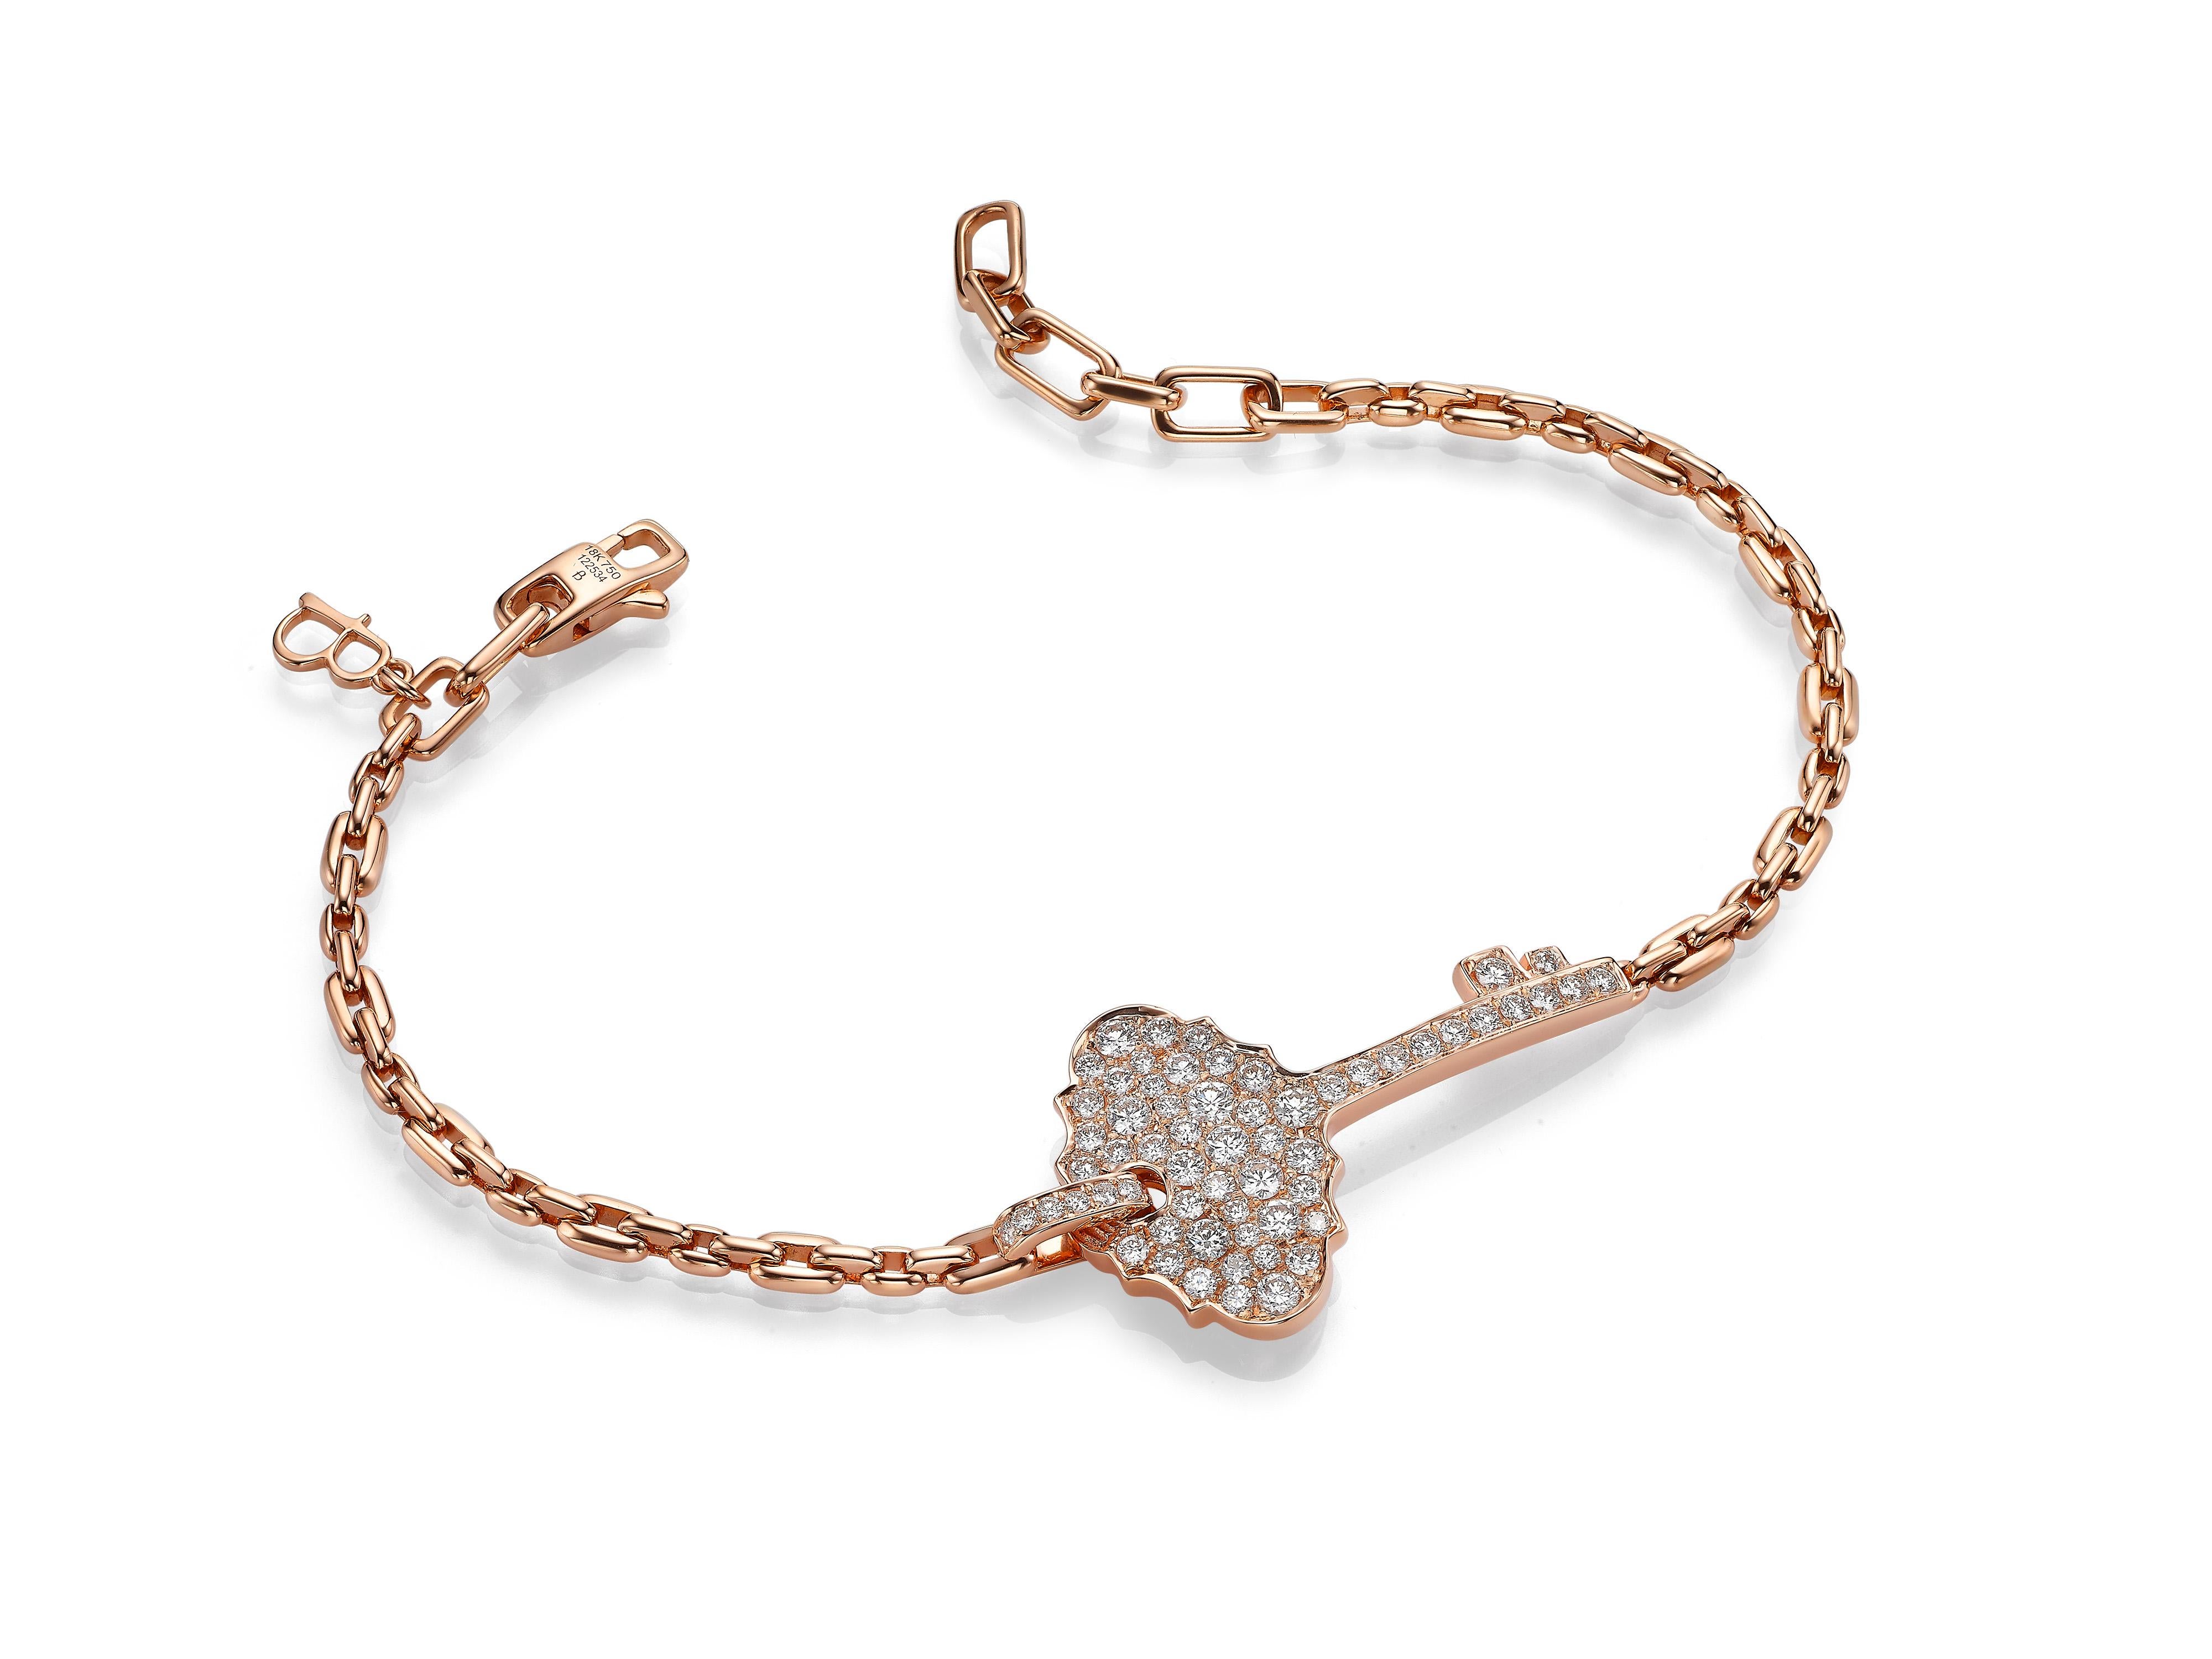 A simple, stackable bracelet that is perfect for every day.  Butani’s 18K rose gold bracelet is strung with a key pendant and encrusted with diamonds totaling 0.89 carats.  Adjustable to your preferred length.  Also available in yellow gold and